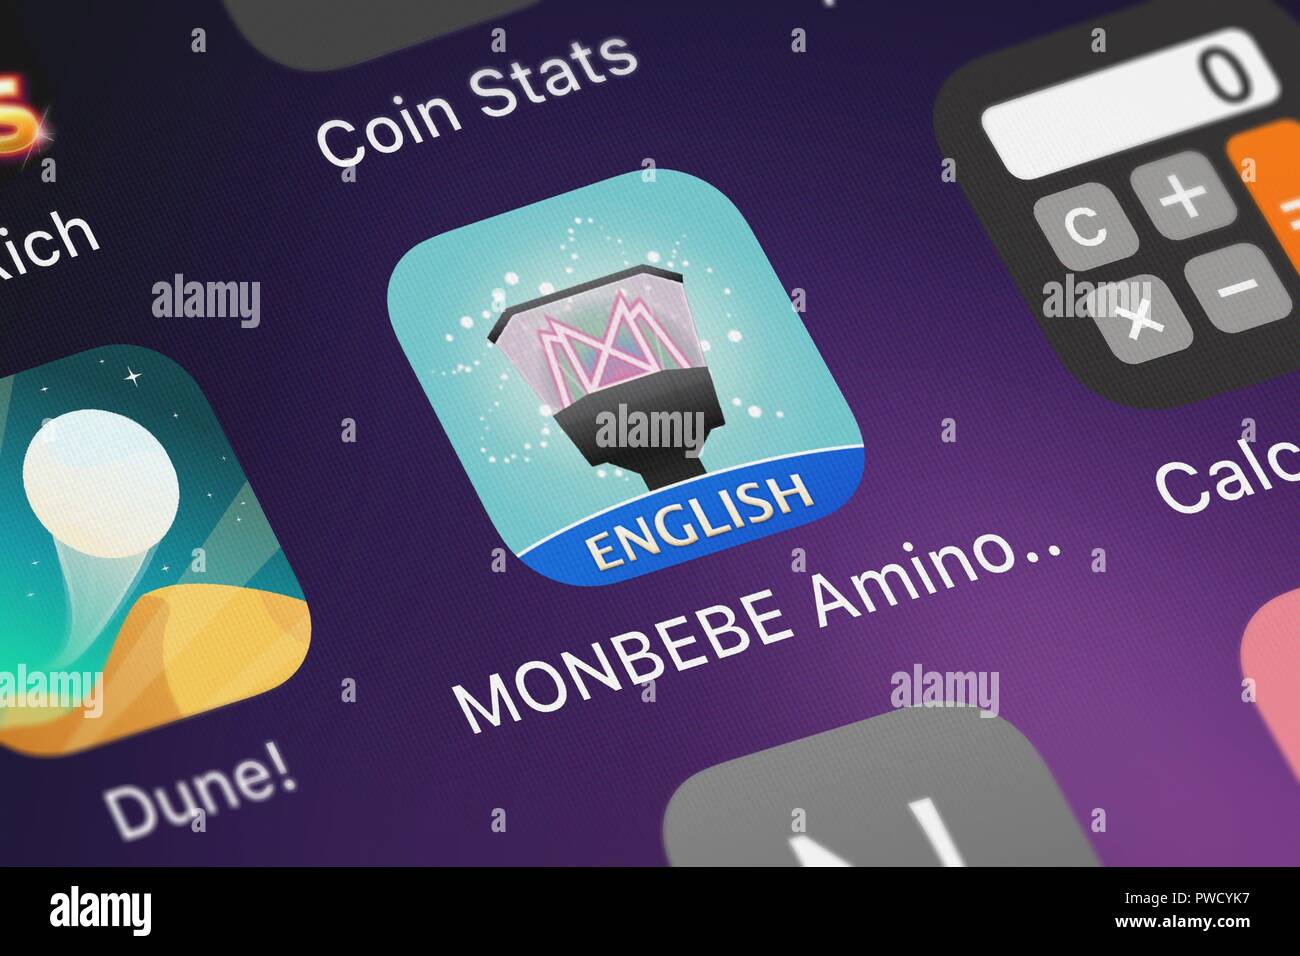 London, United Kingdom - October 15, 2018: Close-up shot of the MONBEBE Amino for MONSTA X mobile app from Narvii Inc.. Stock Photo